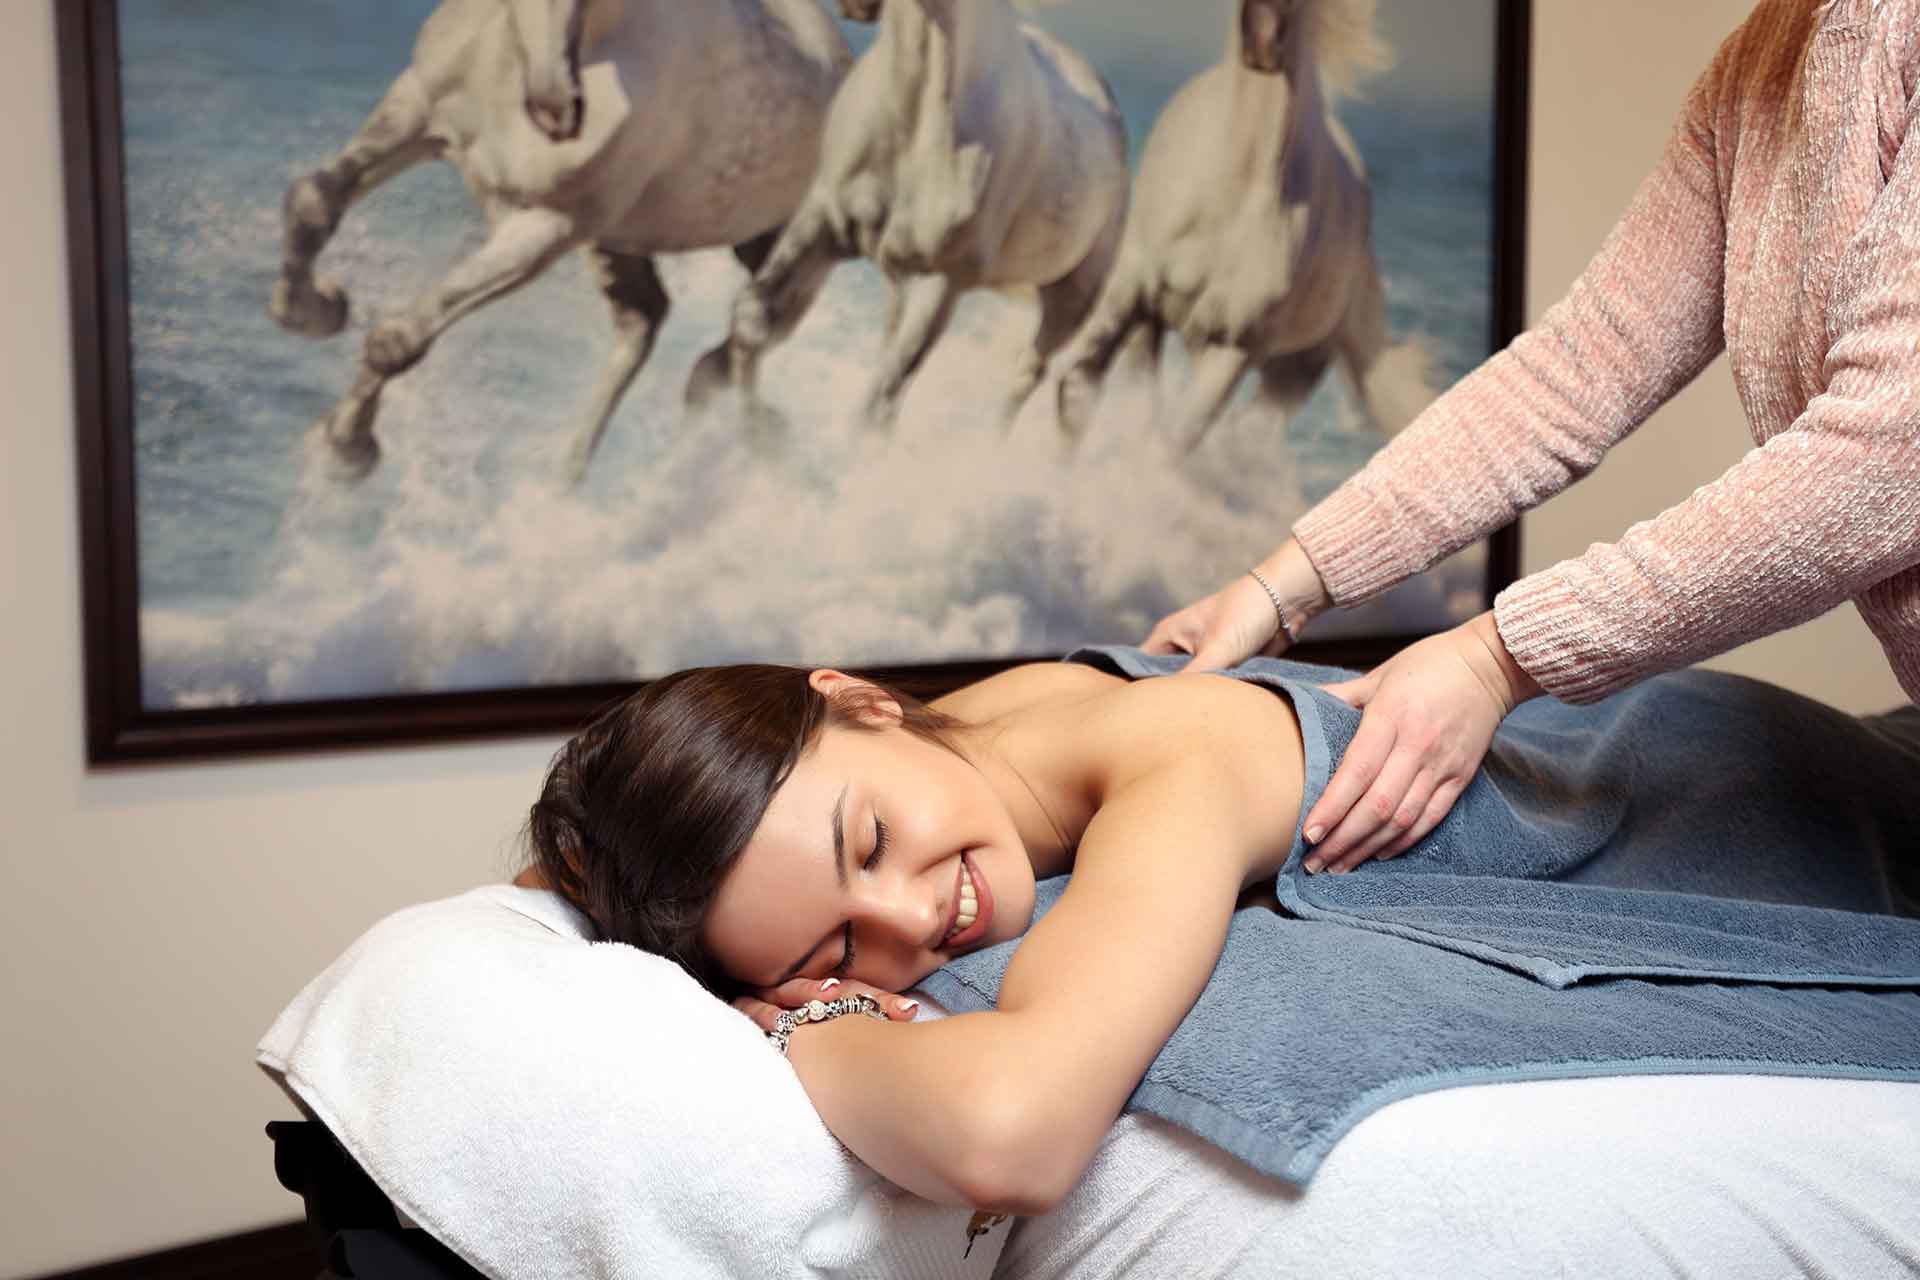 On this picture have a woman on massage bed. Behind her have a picture with three white horses.